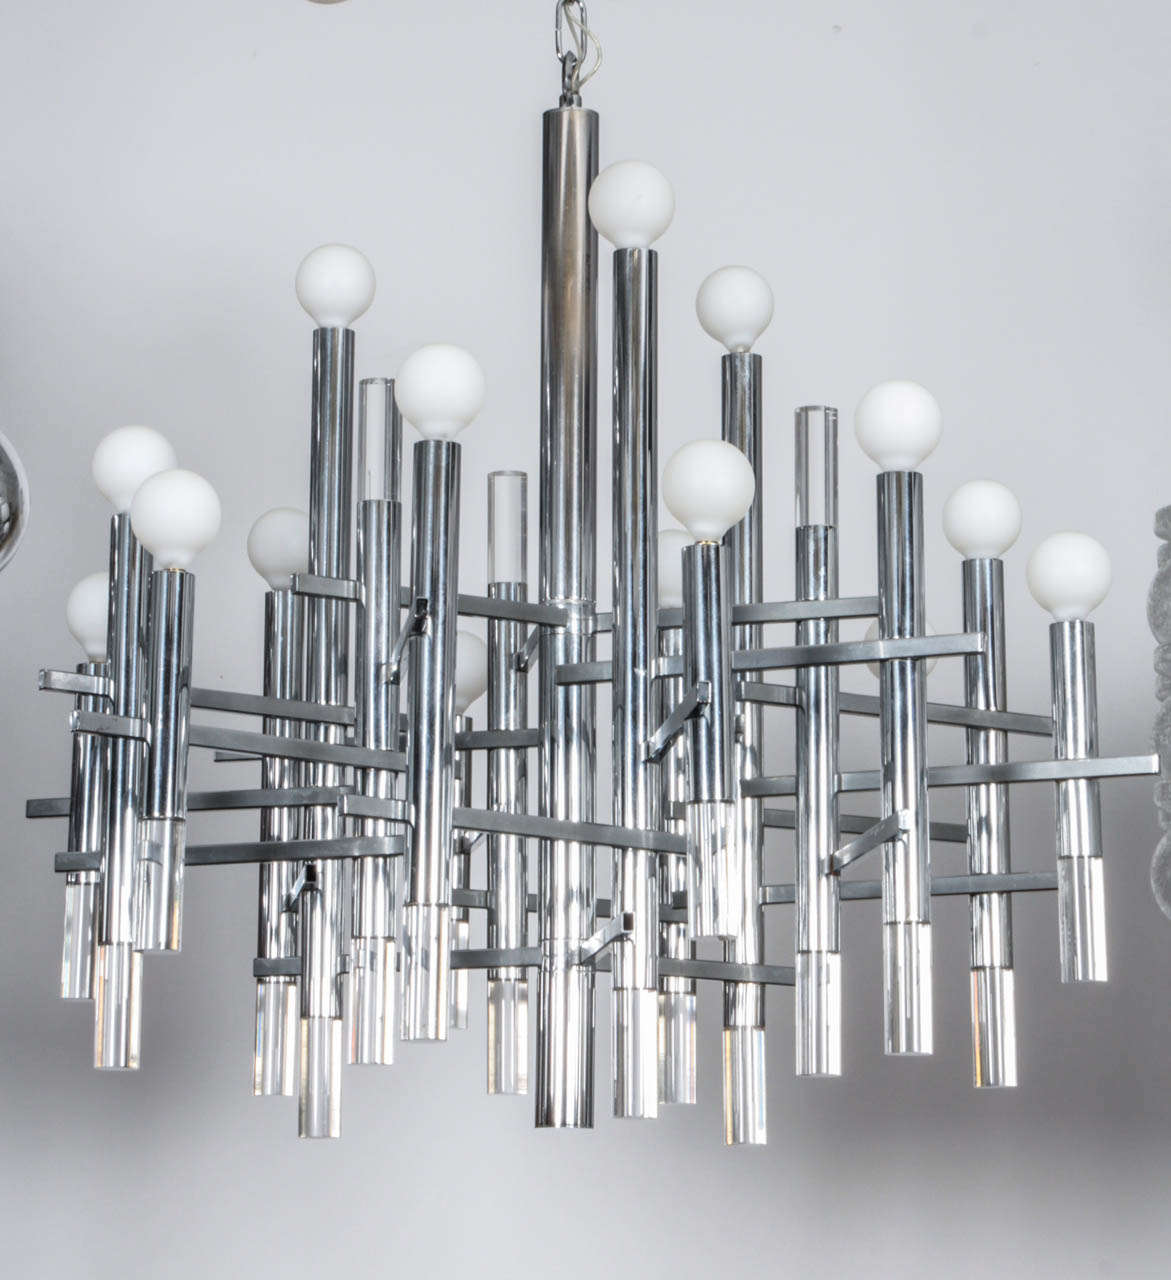 Gaetano Sciolari Bravura Cartesian 15 light chandelier made of chrome plated steel and Lucite. The base of the chandelier measures 26 inches long and is 25 inches in diameter.